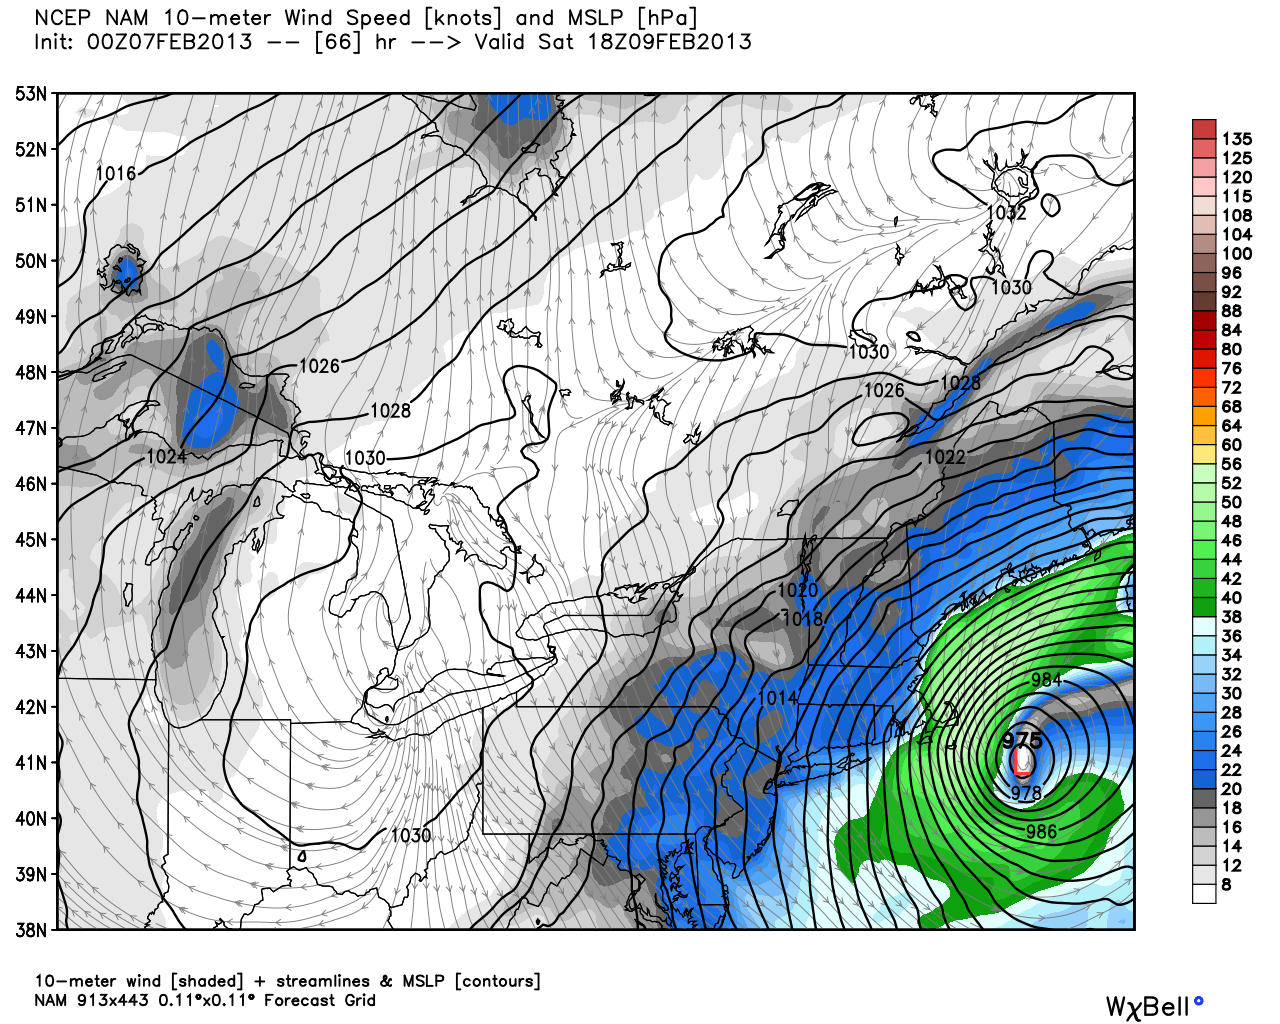 00Z NAM Sustained winds 1pm Sunday - widespread 50kt (60 mph) winds in Eastern MA